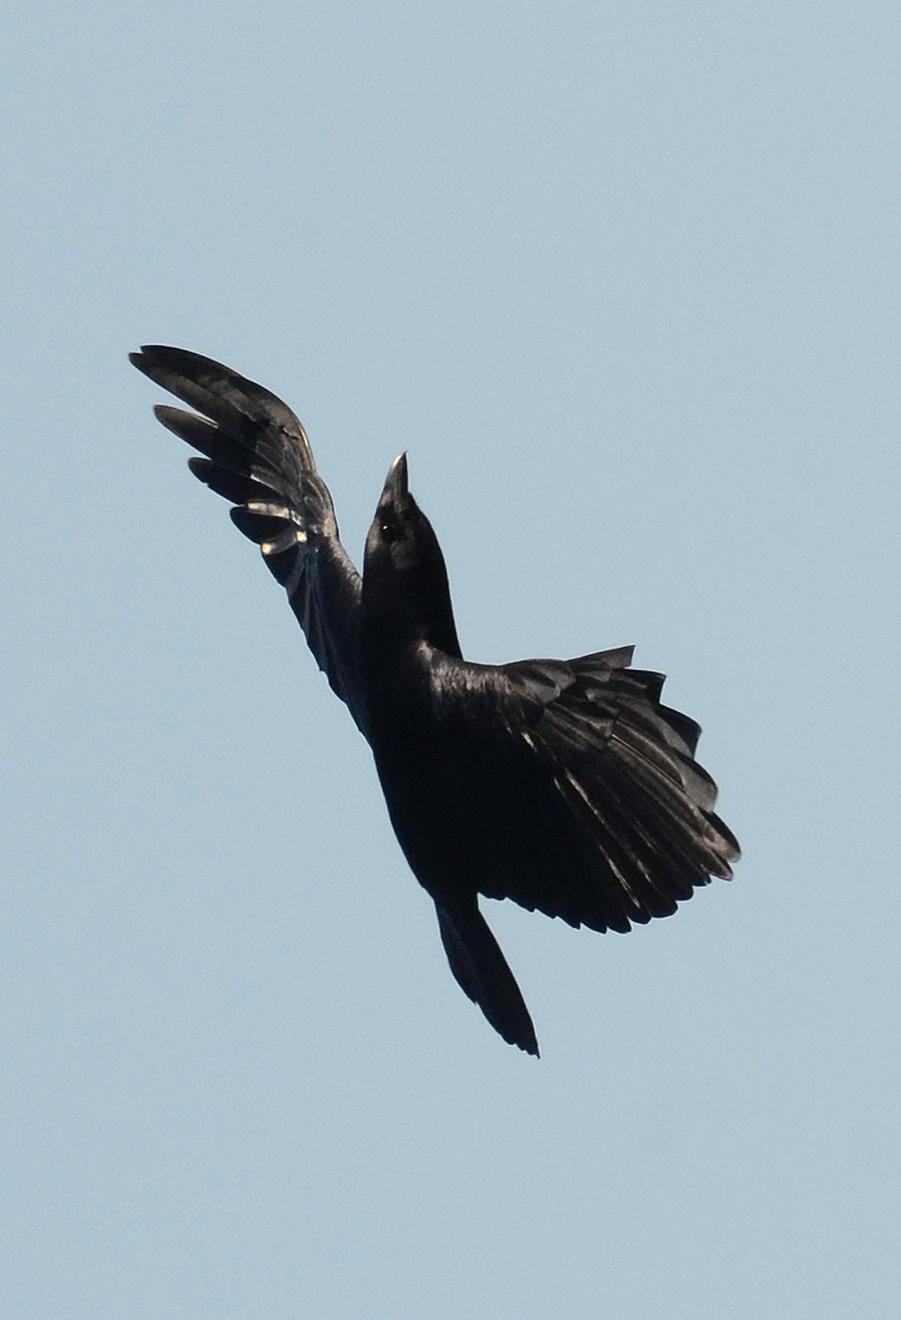 Fish Crow Photo by Steven Mlodinow